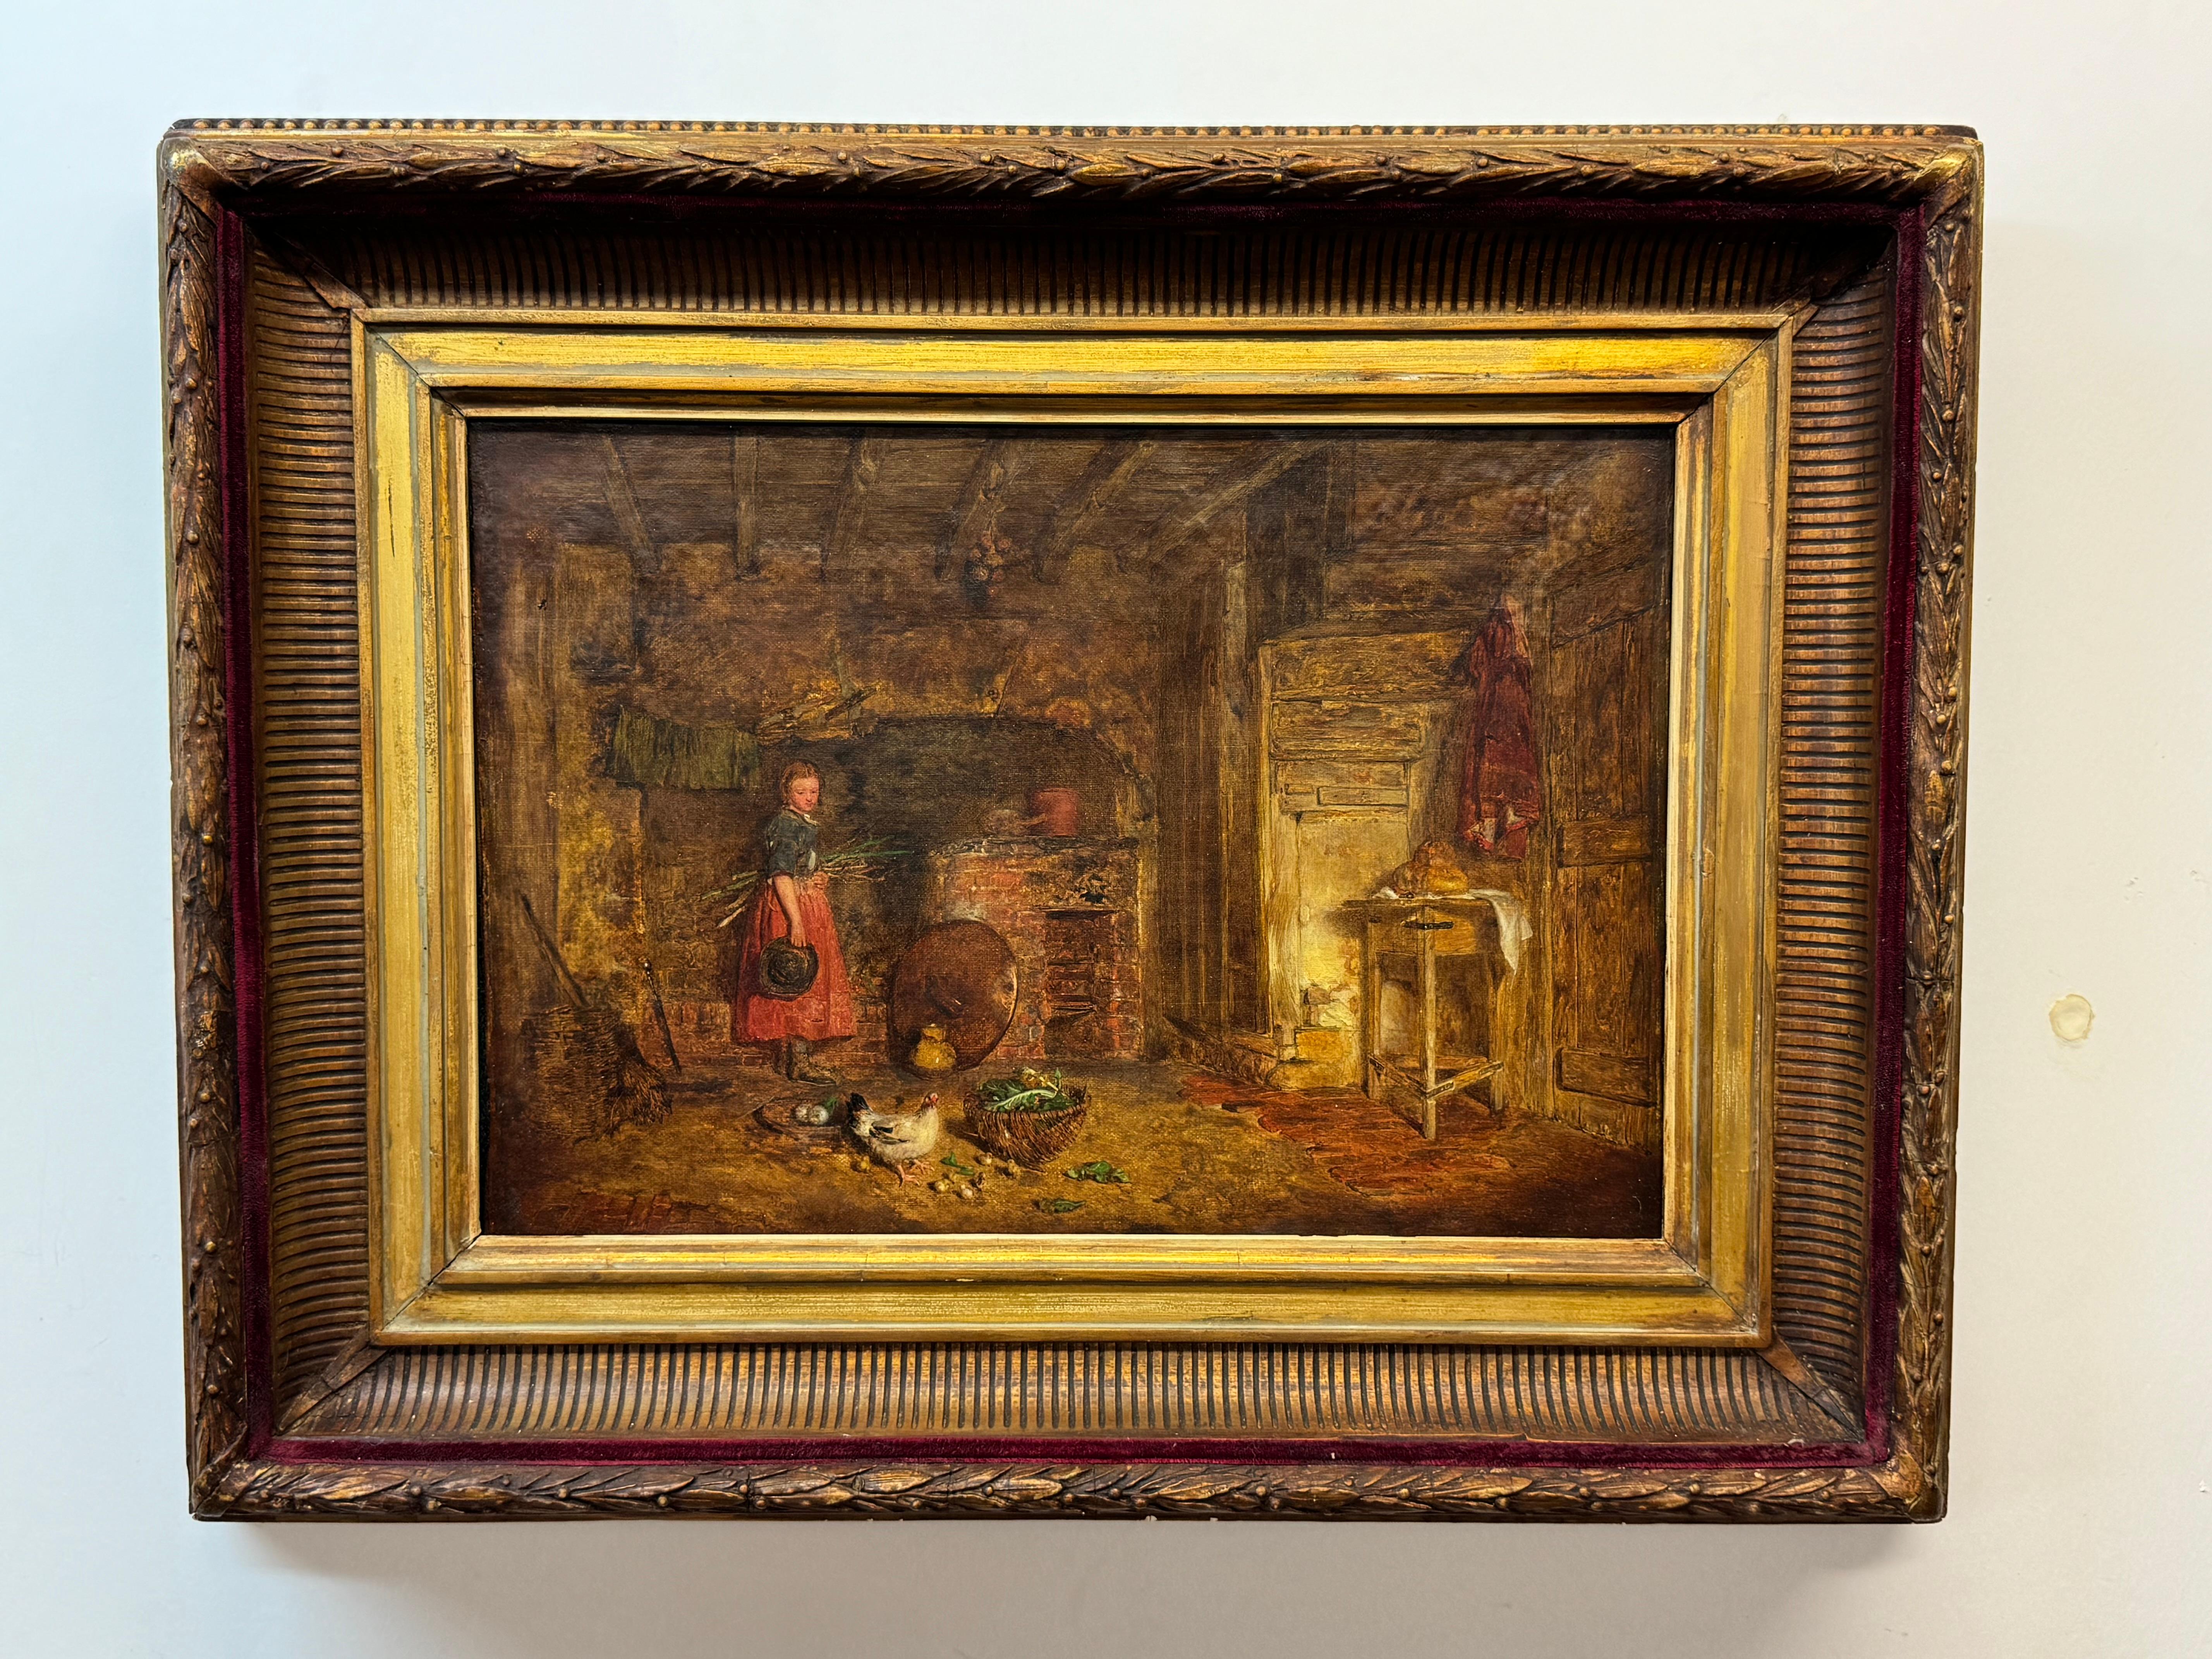 Alfred Provis (1843-1886) signed oil painting on canvas English artist. Exhibited at the Royal Academy of Art. English artist most depict cottages and farmhouse interiors. Unfriended 16 x 11. Framed 23.5 x 18.75. The frame is most likely original